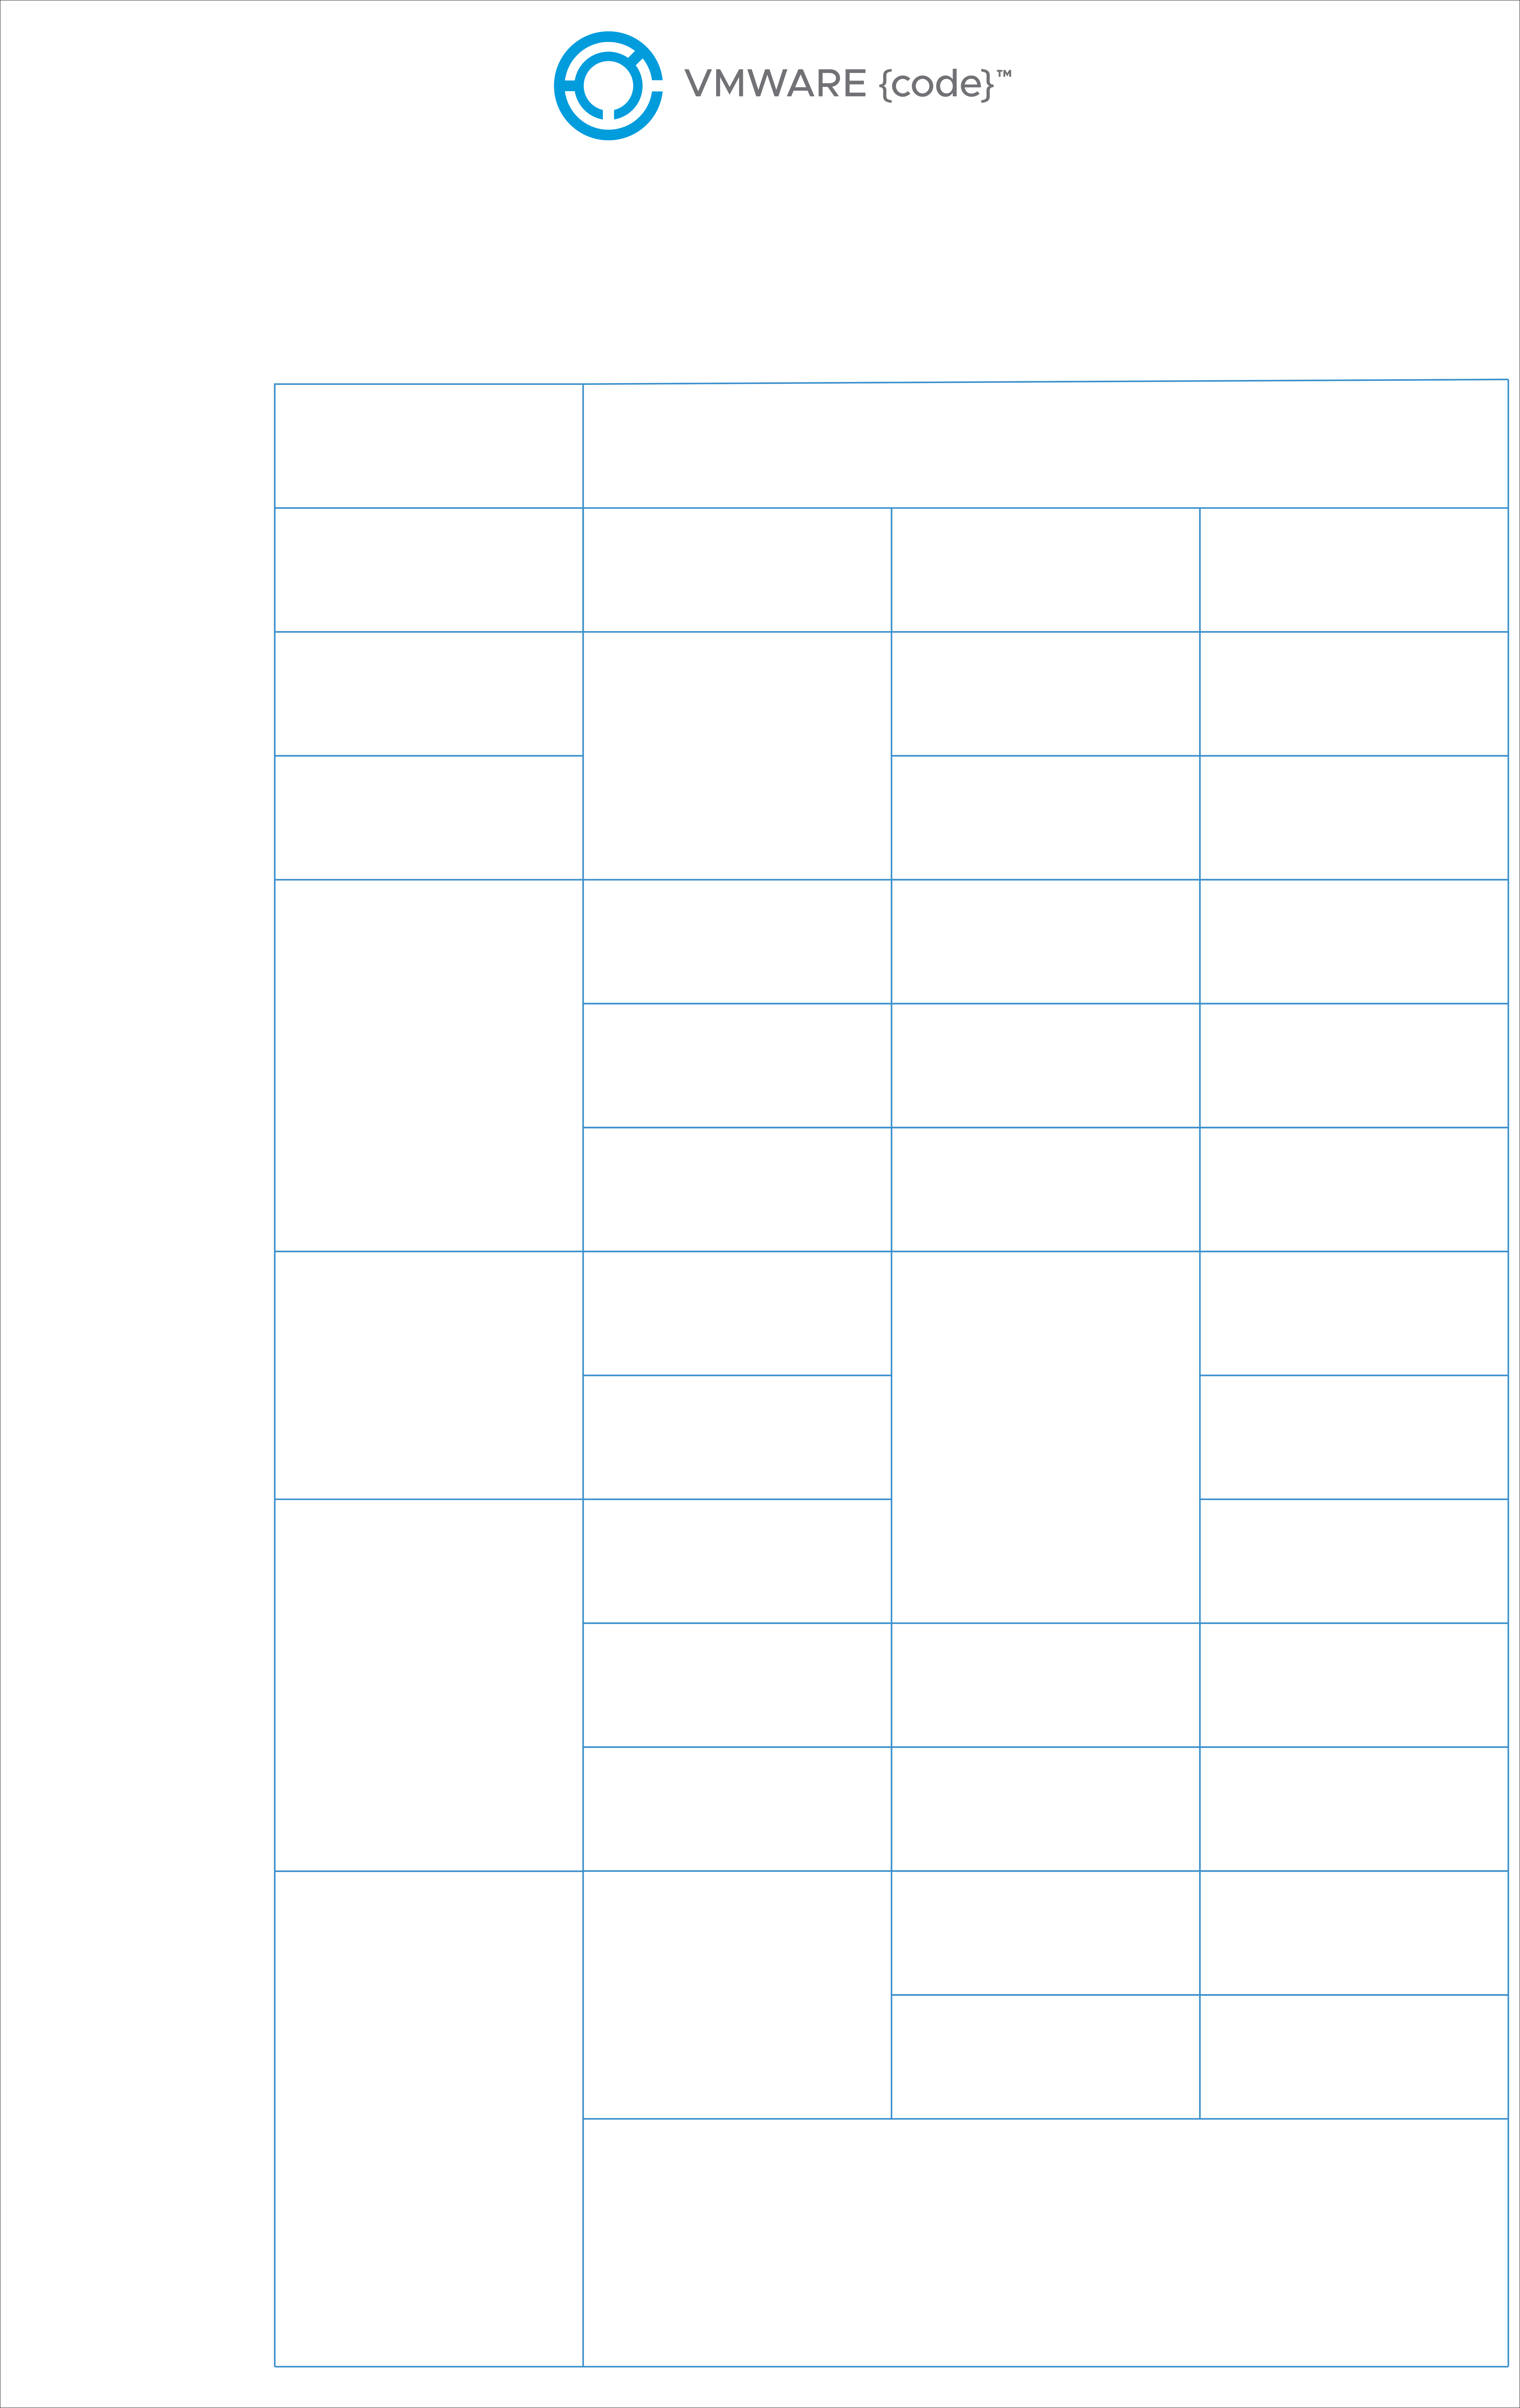 Conference Schedule